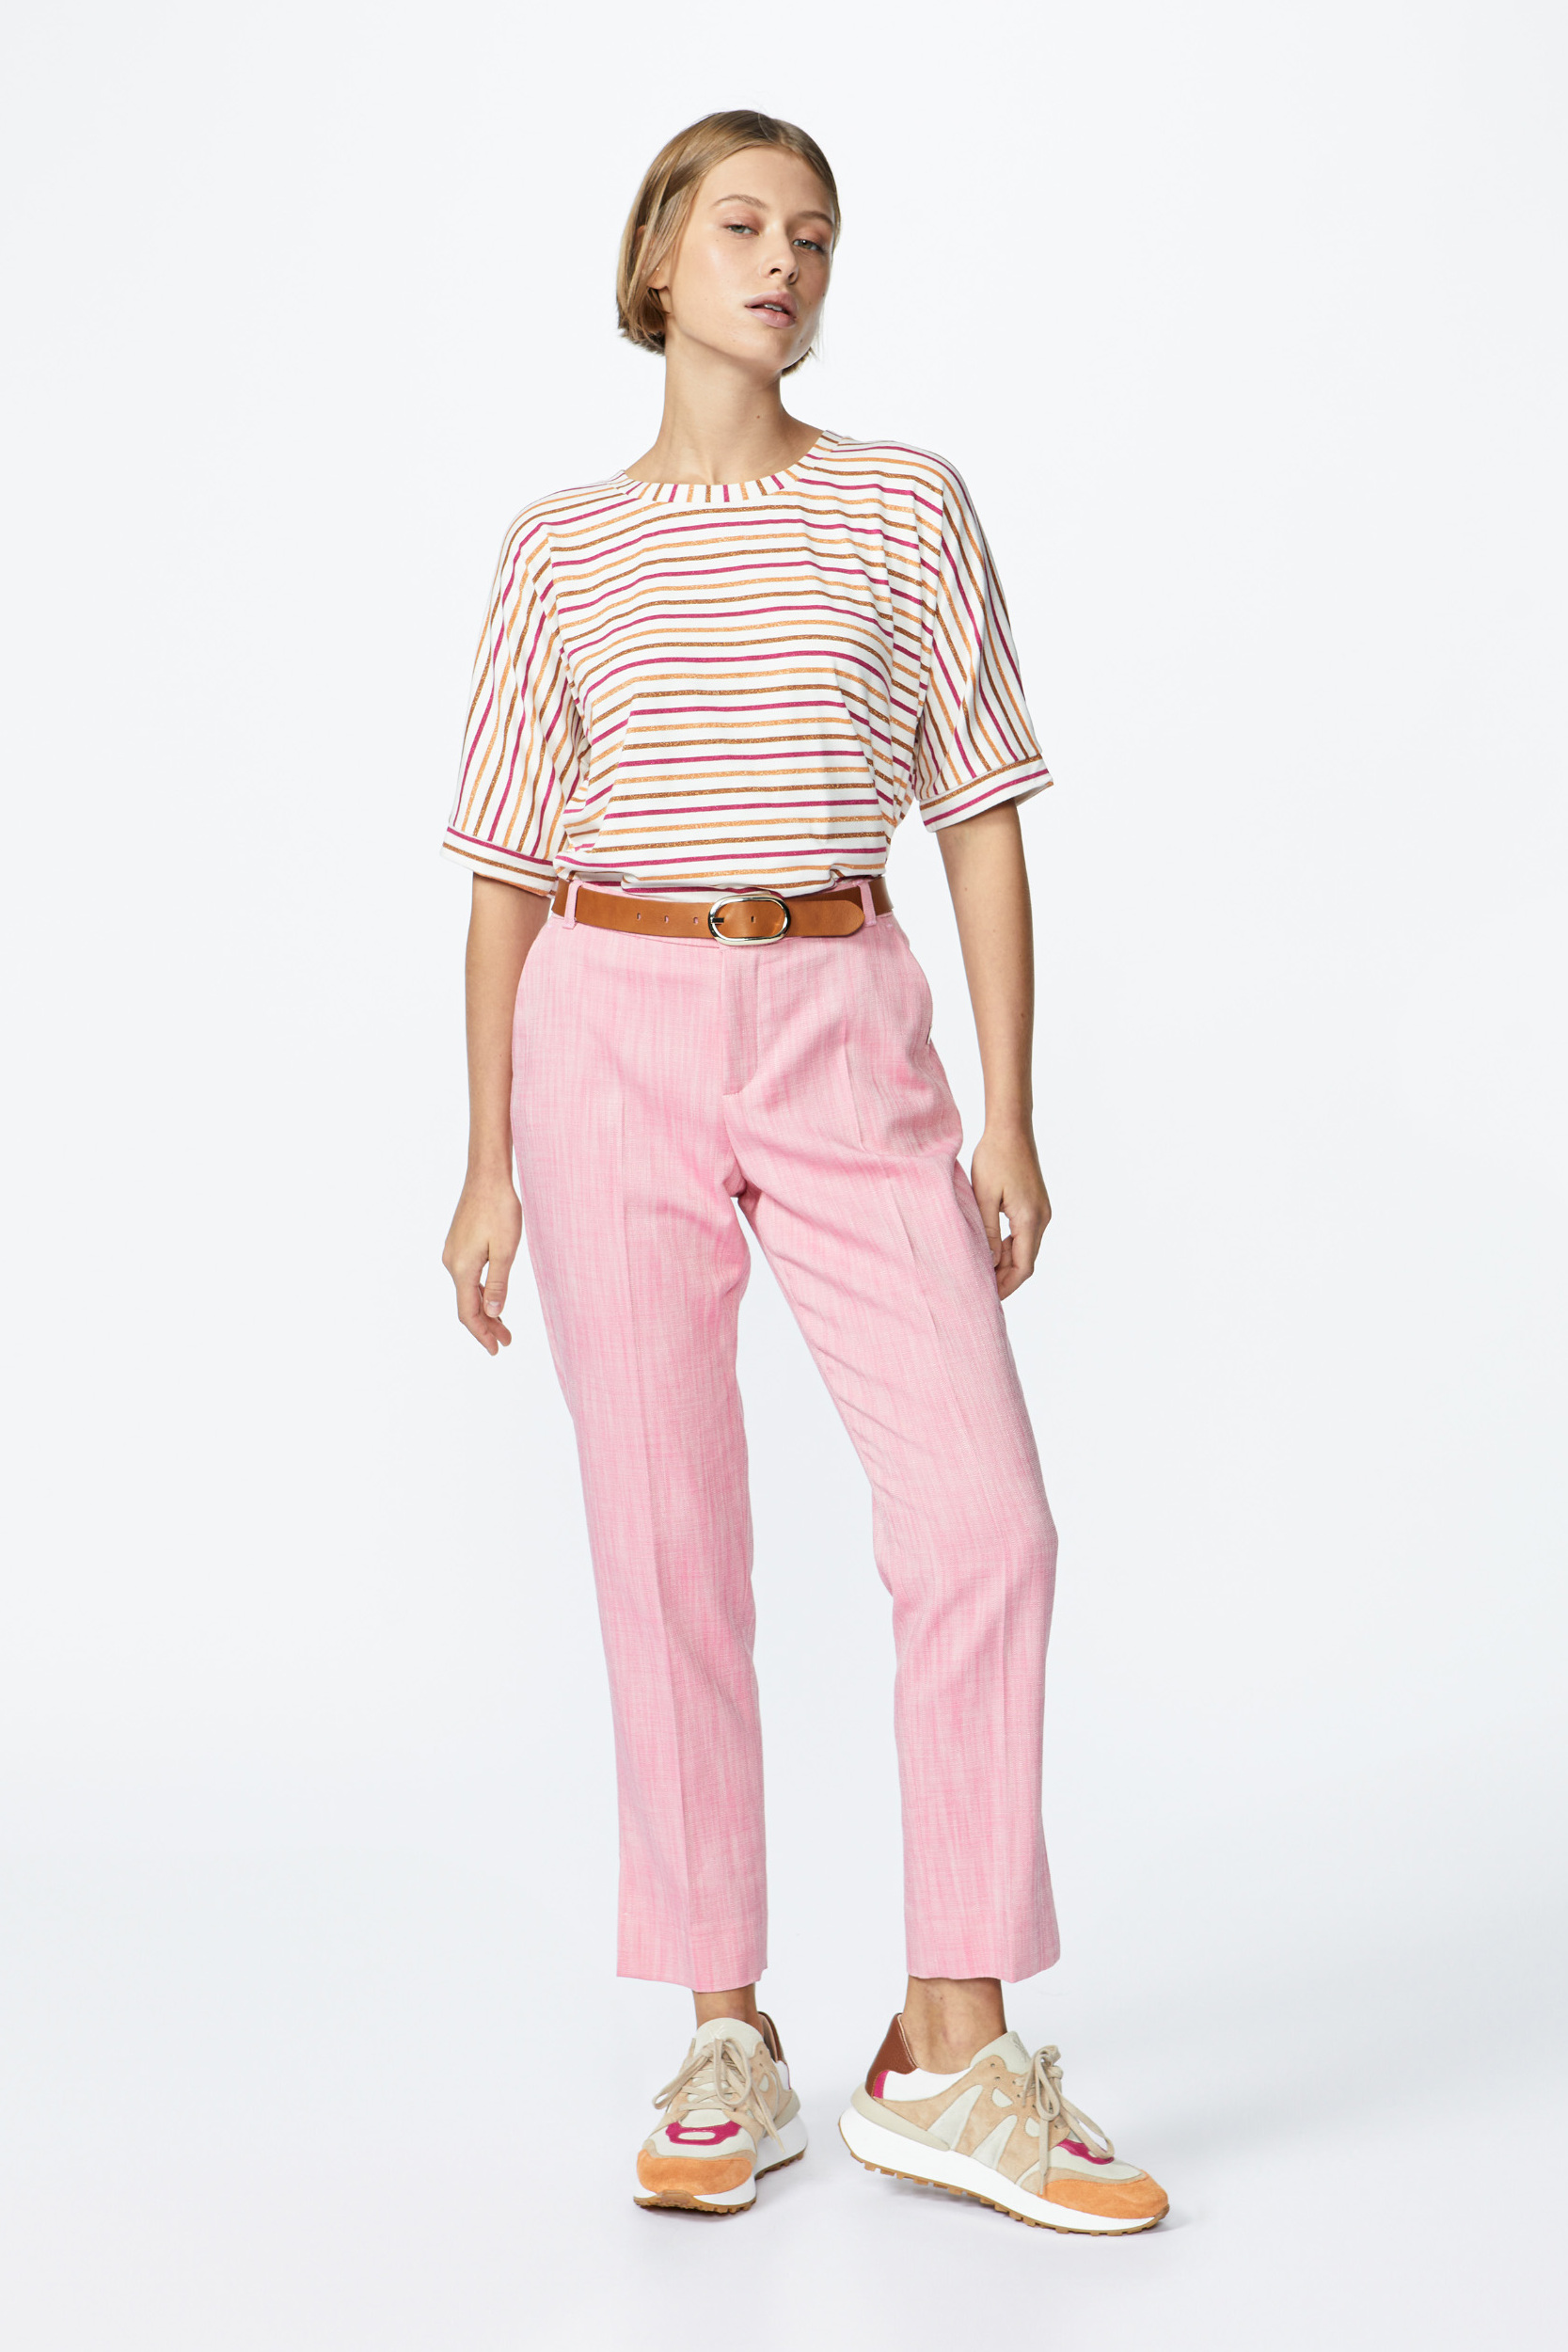 Multicoloured T-shirt with stripes